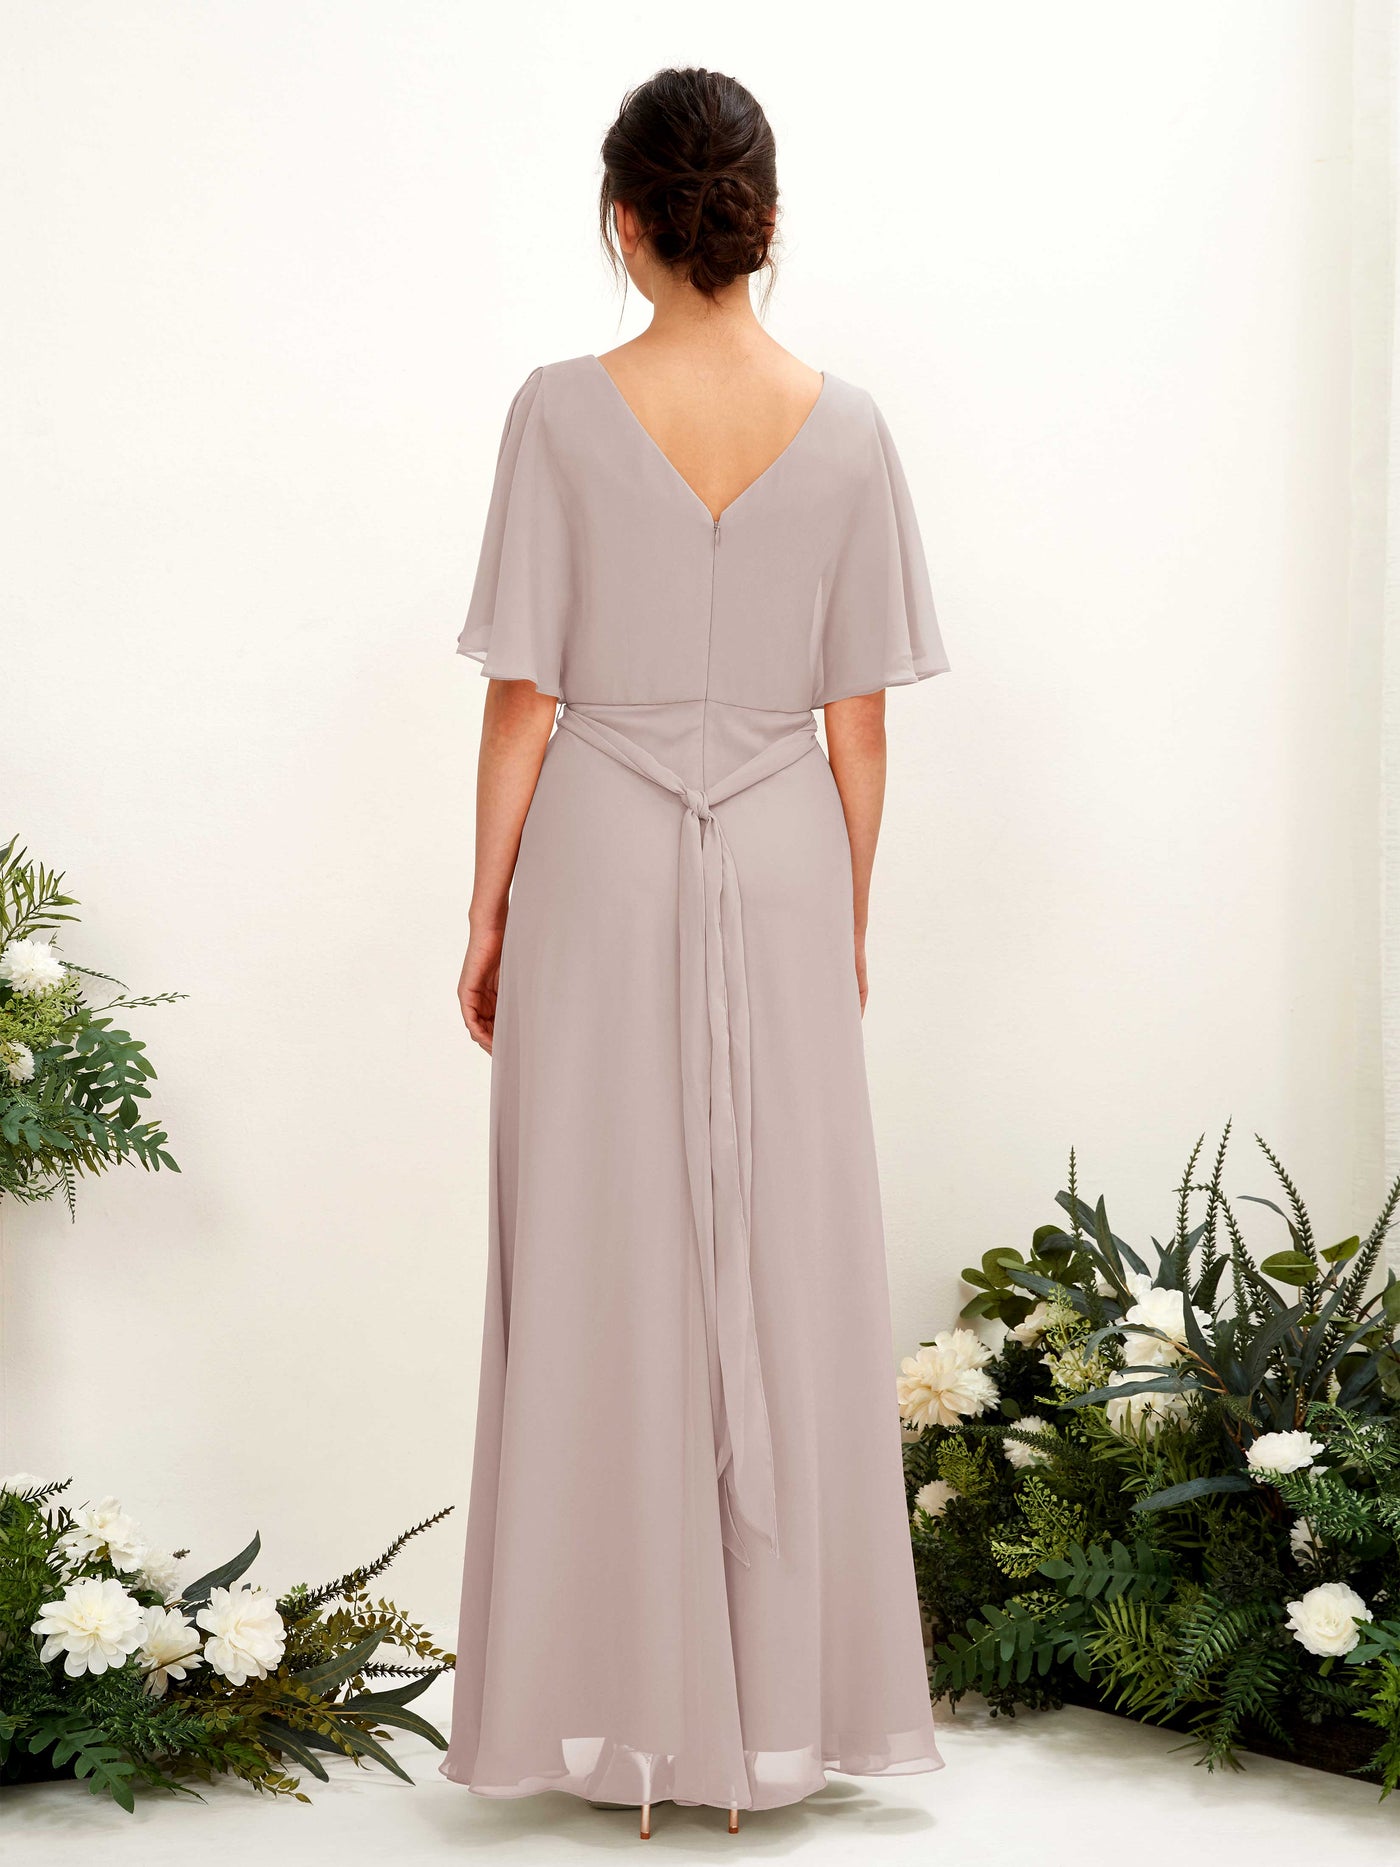 Taupe Bridesmaid Dresses Bridesmaid Dress A-line Chiffon V-neck Full Length Short Sleeves Wedding Party Dress (81222424)#color_taupe